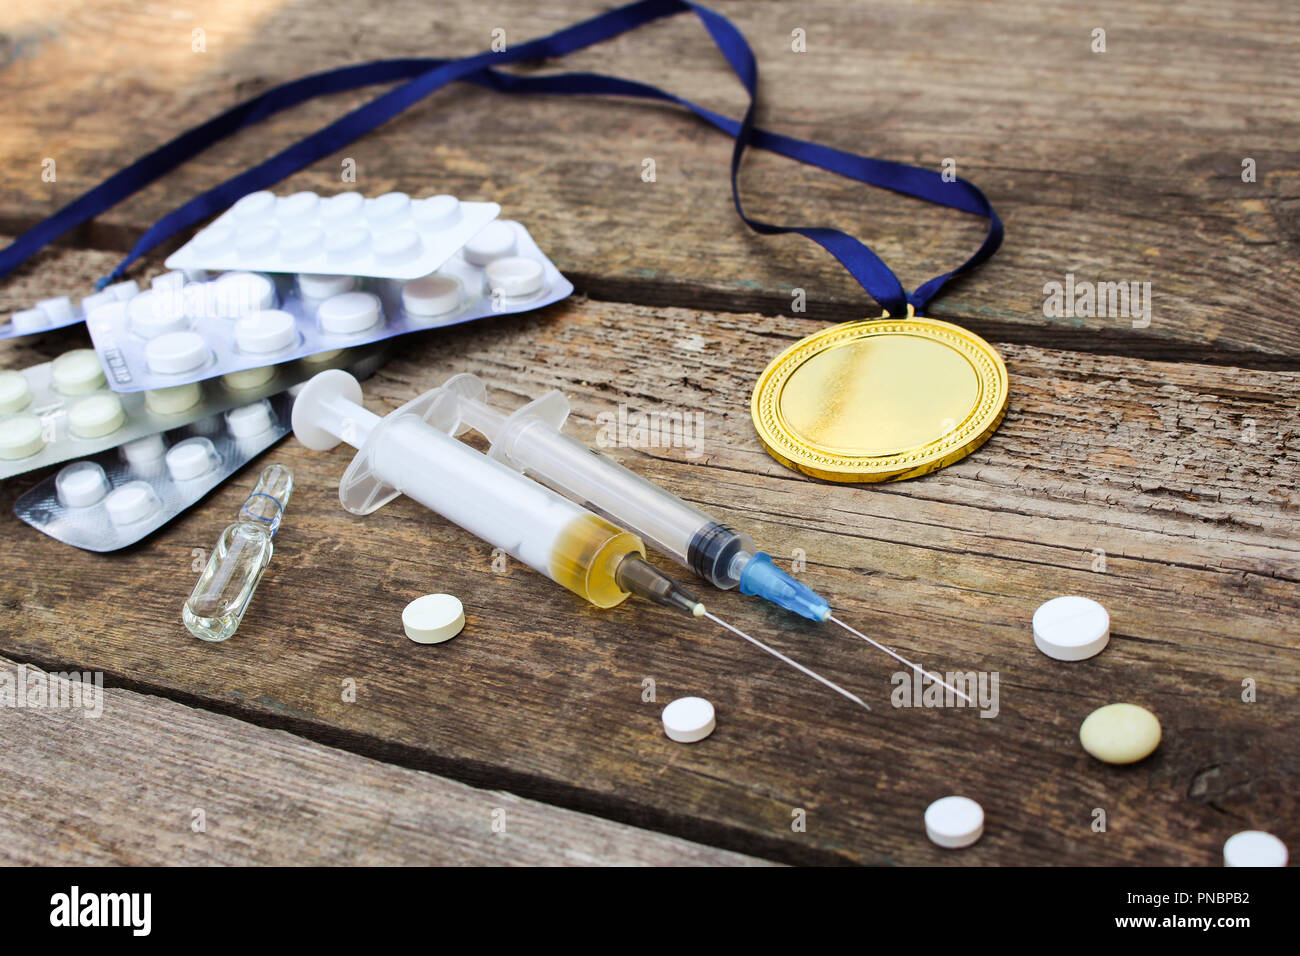 Sports medal and medicines on a wooden background. Toned image. Stock Photo